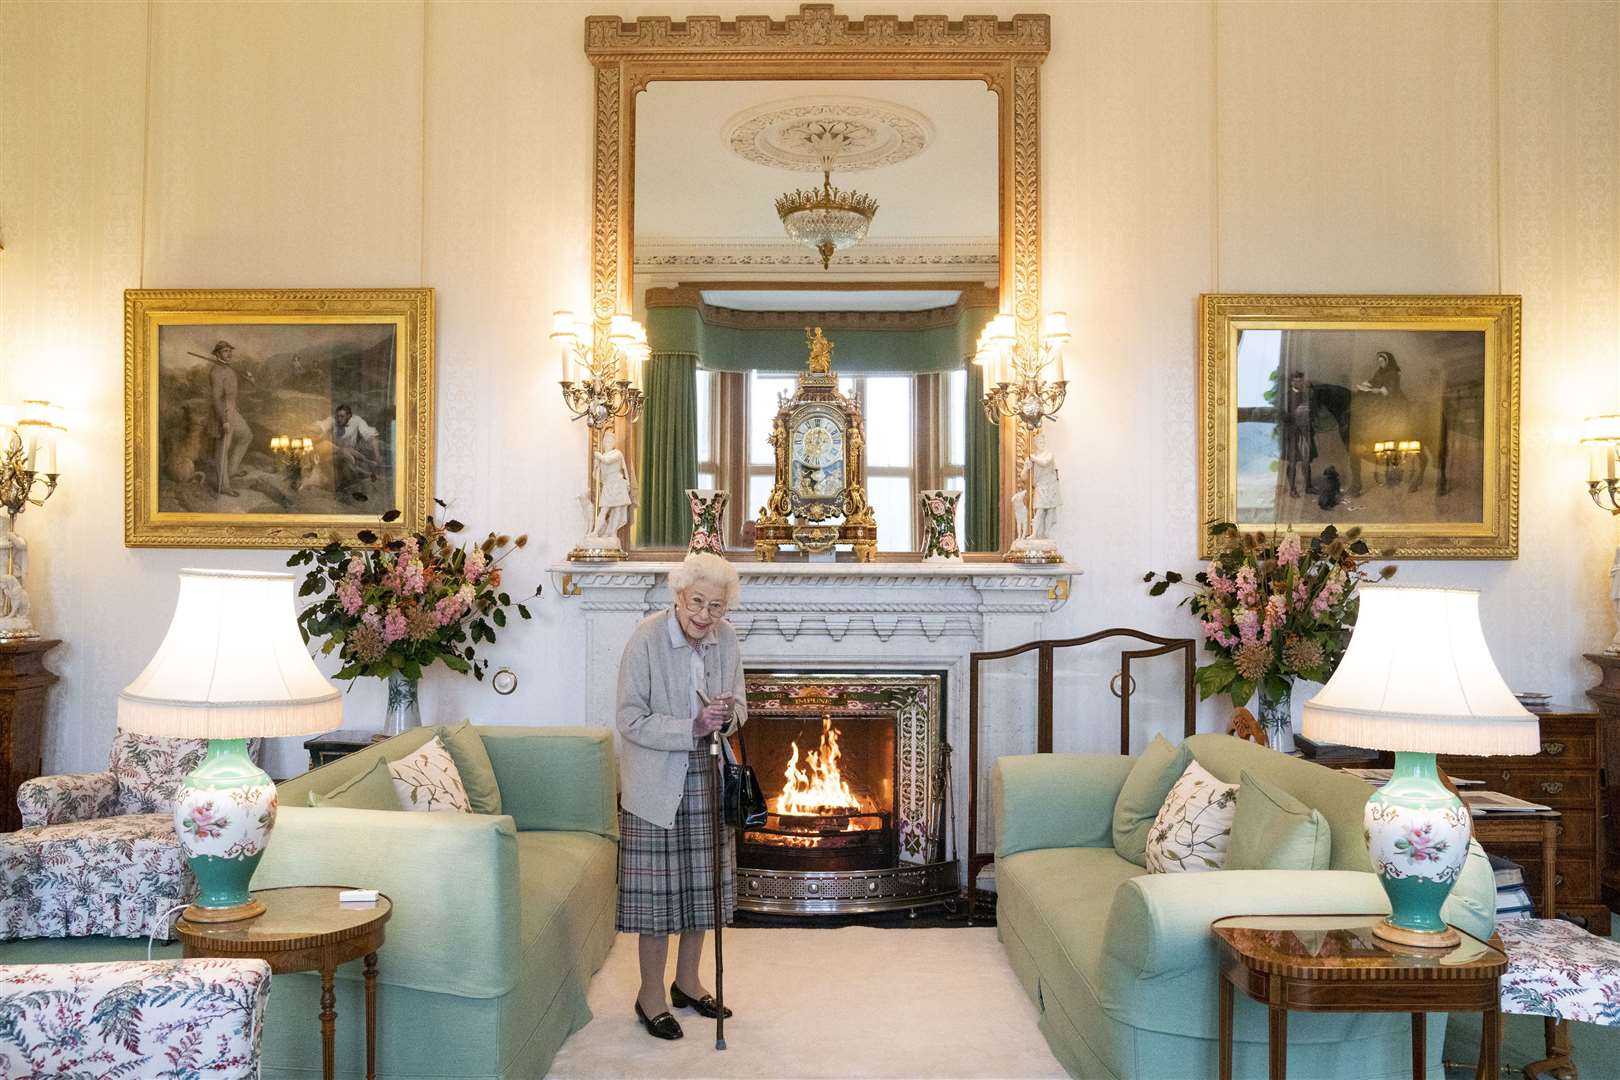 Queen Elizabeth II waits in the Drawing Room before receiving Liz Truss for an audience at Balmoral, Scotland, on September 6 2022 (Jane Barlow/PA)